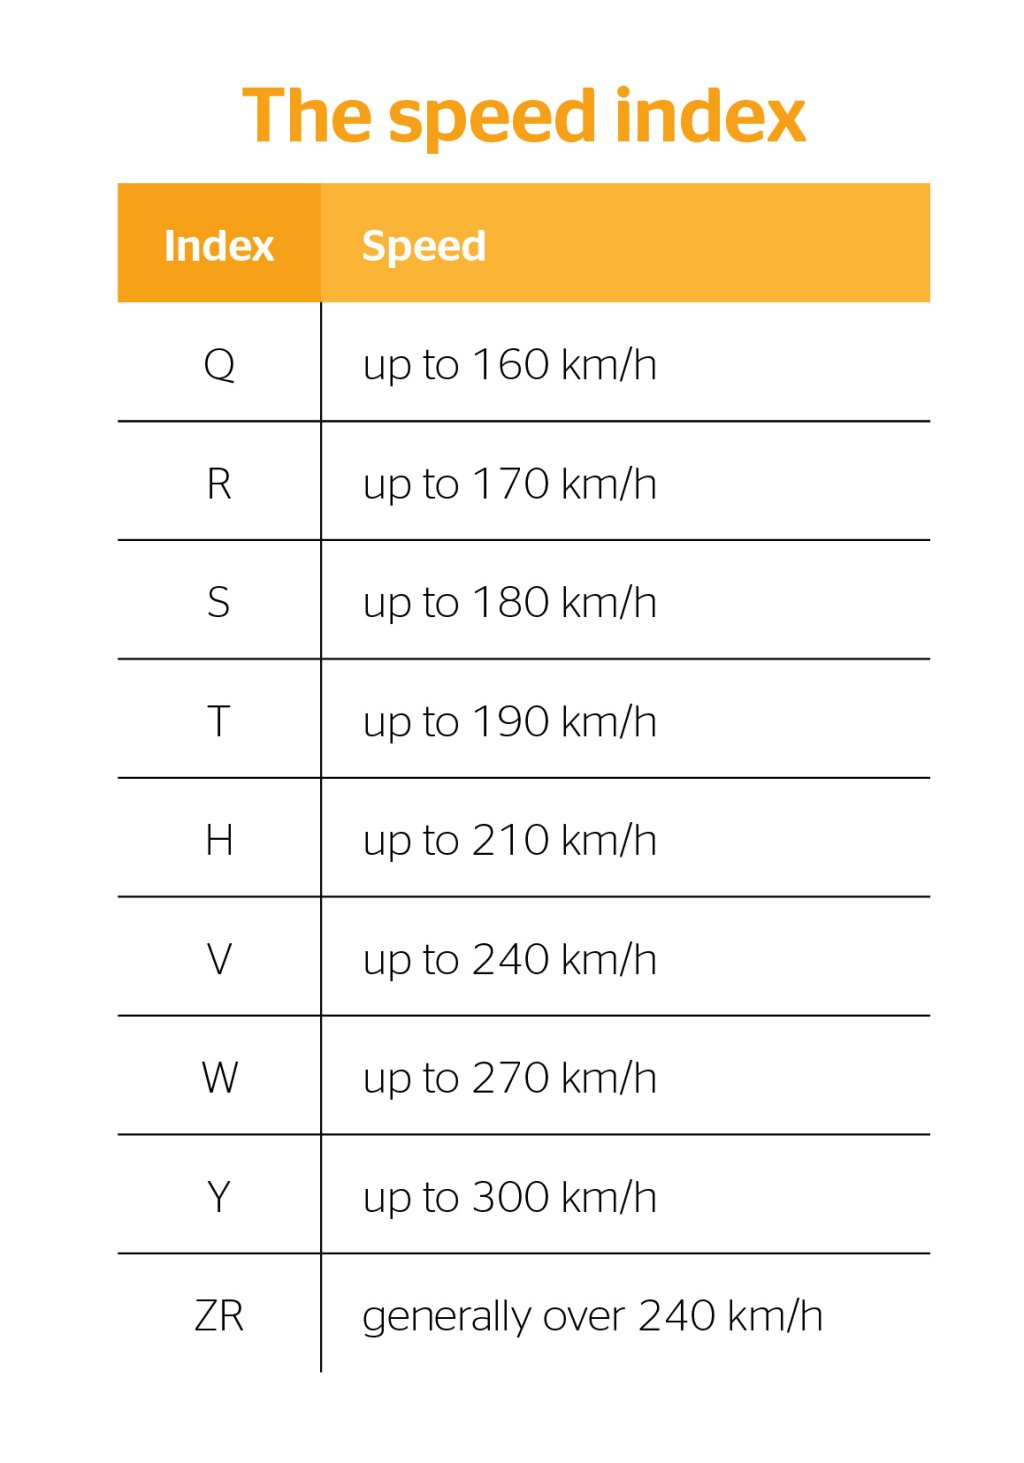 Speed and load ratings for your tyres